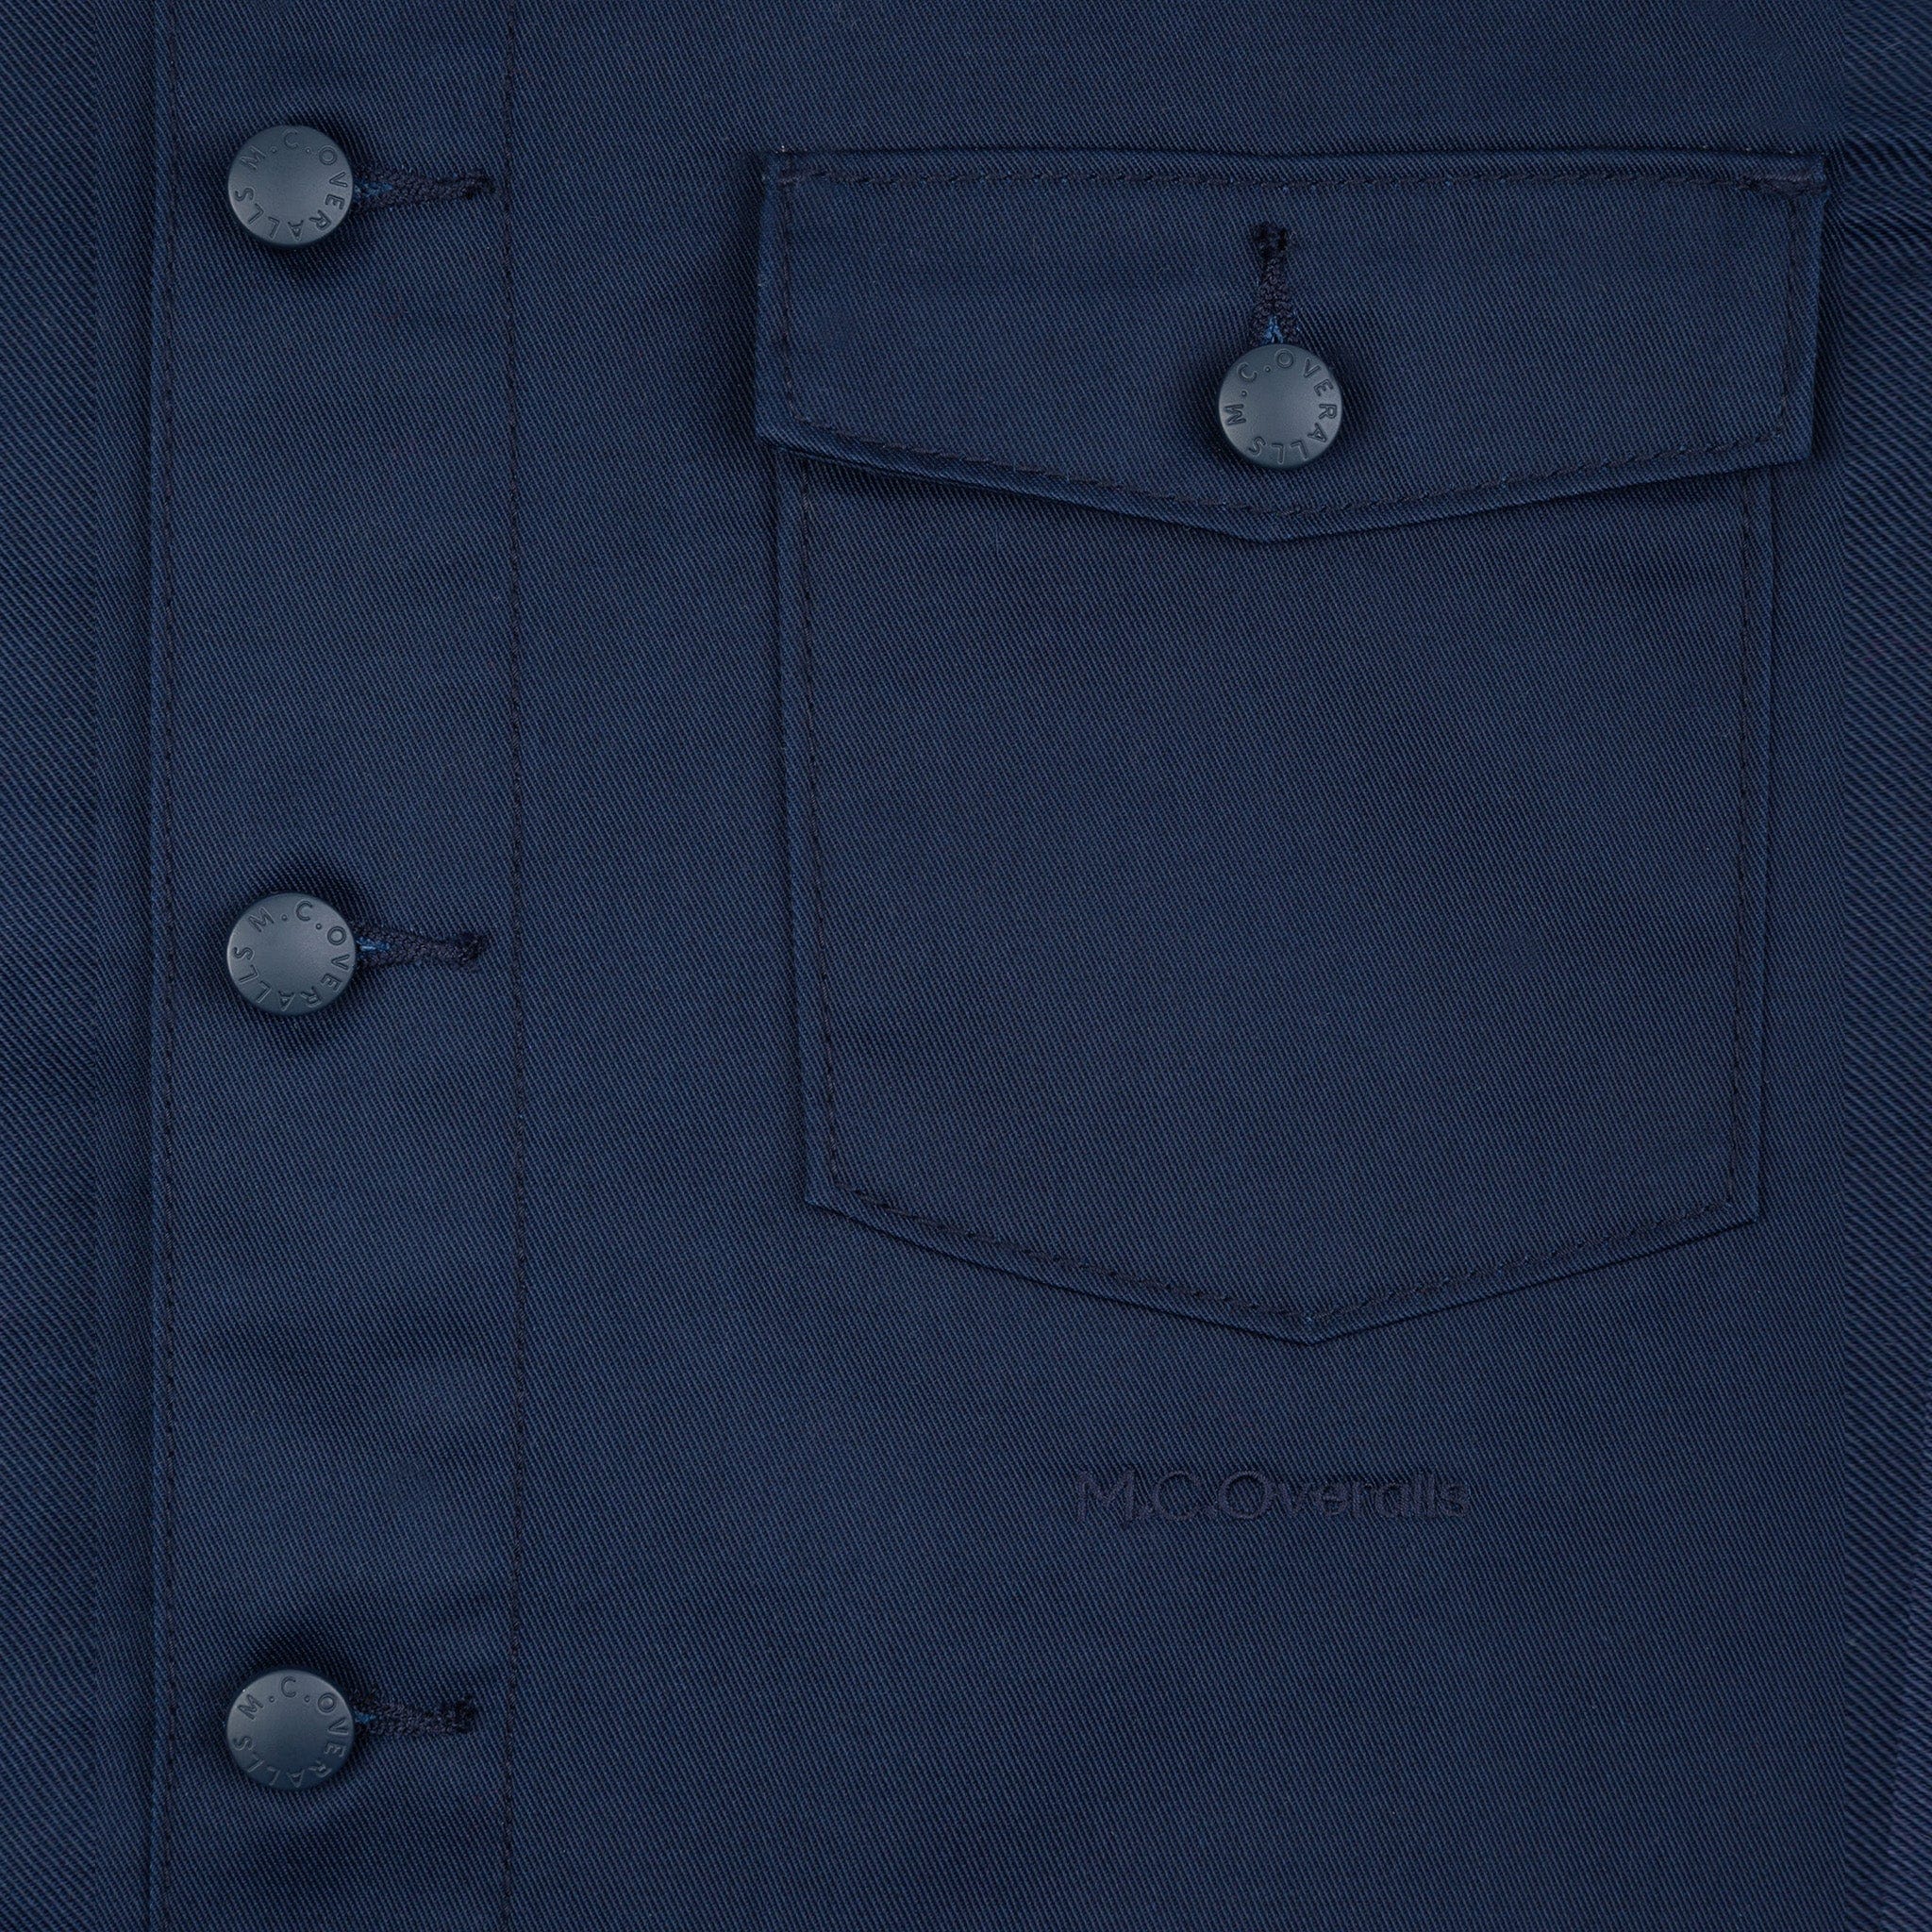 M.C.O&#39;s Logo Placed below the Pocket of Polycotton Navy Work Jacket.